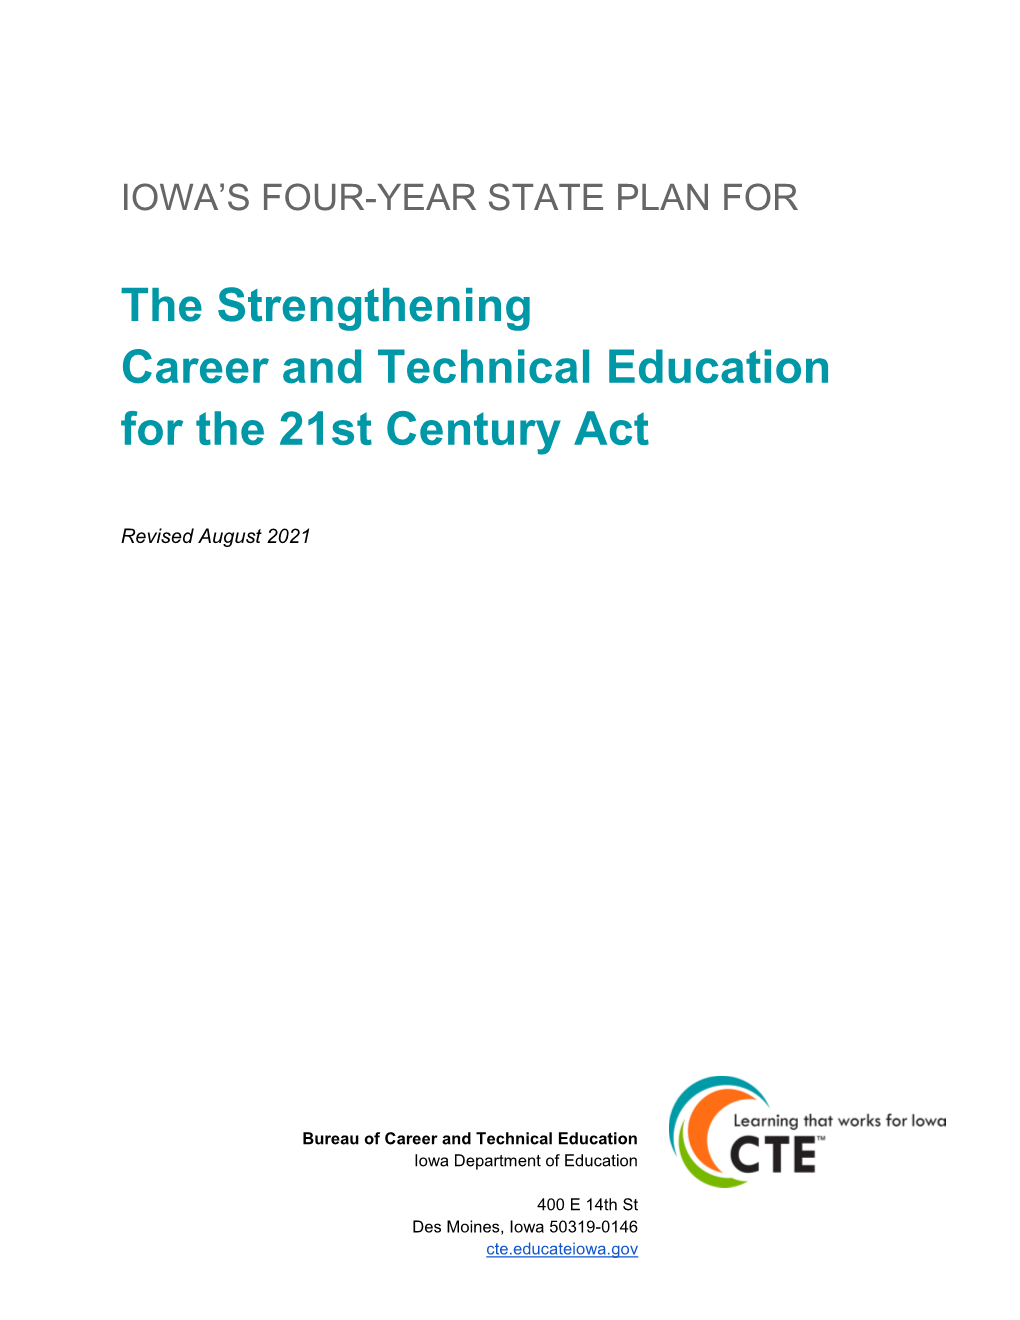 Iowa's Four-Year State Plan for the Strengthening Career And